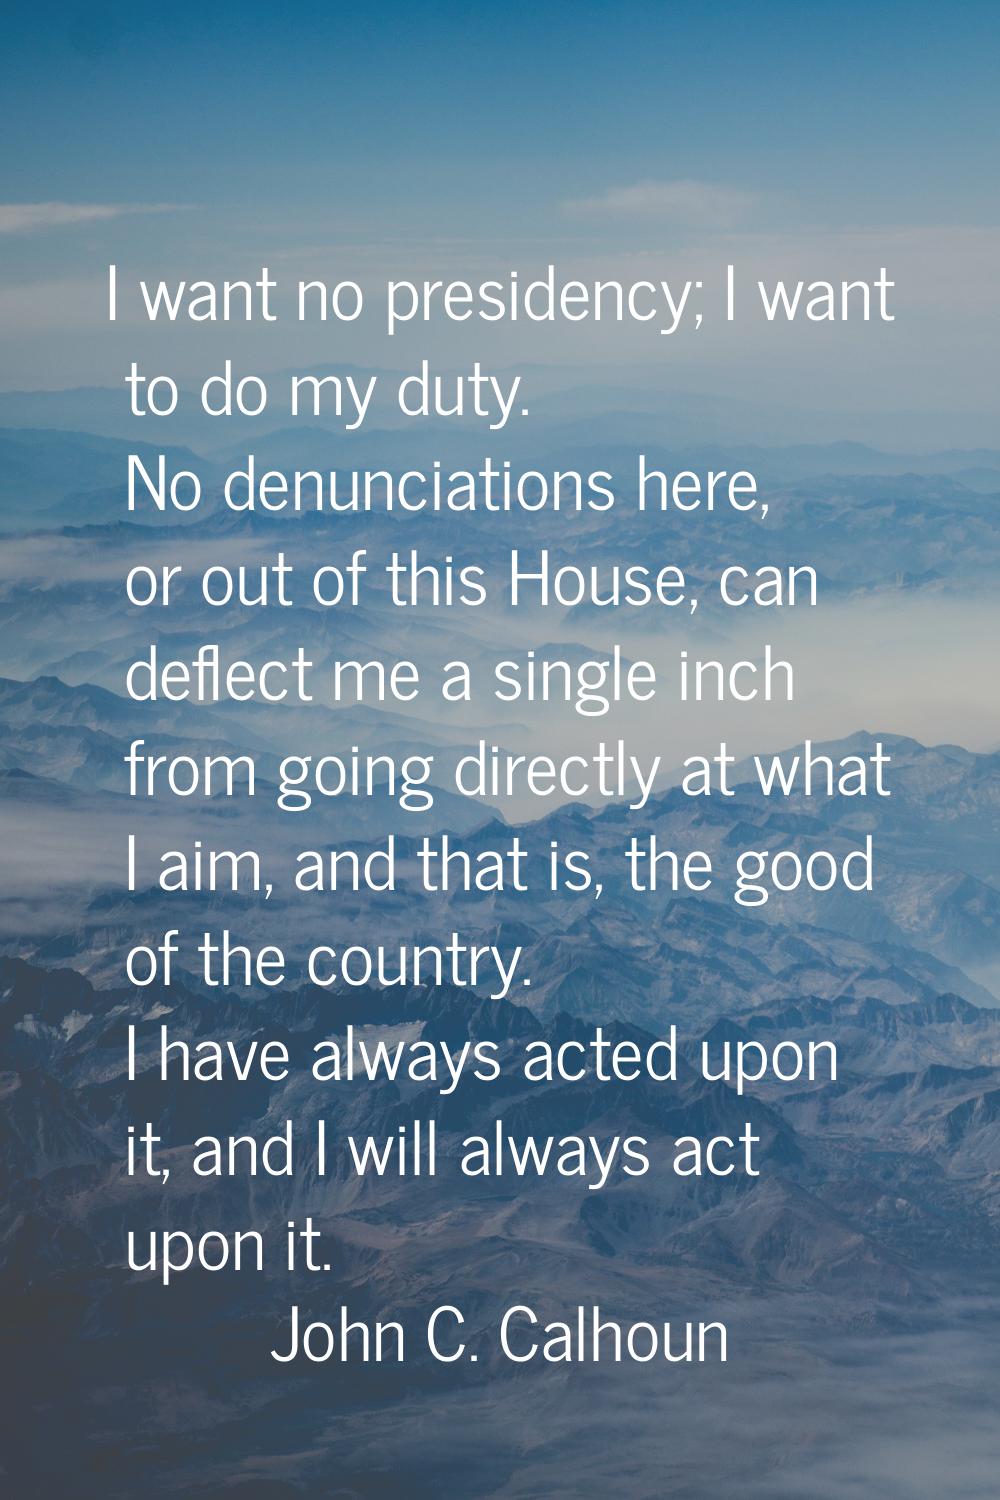 I want no presidency; I want to do my duty. No denunciations here, or out of this House, can deflec